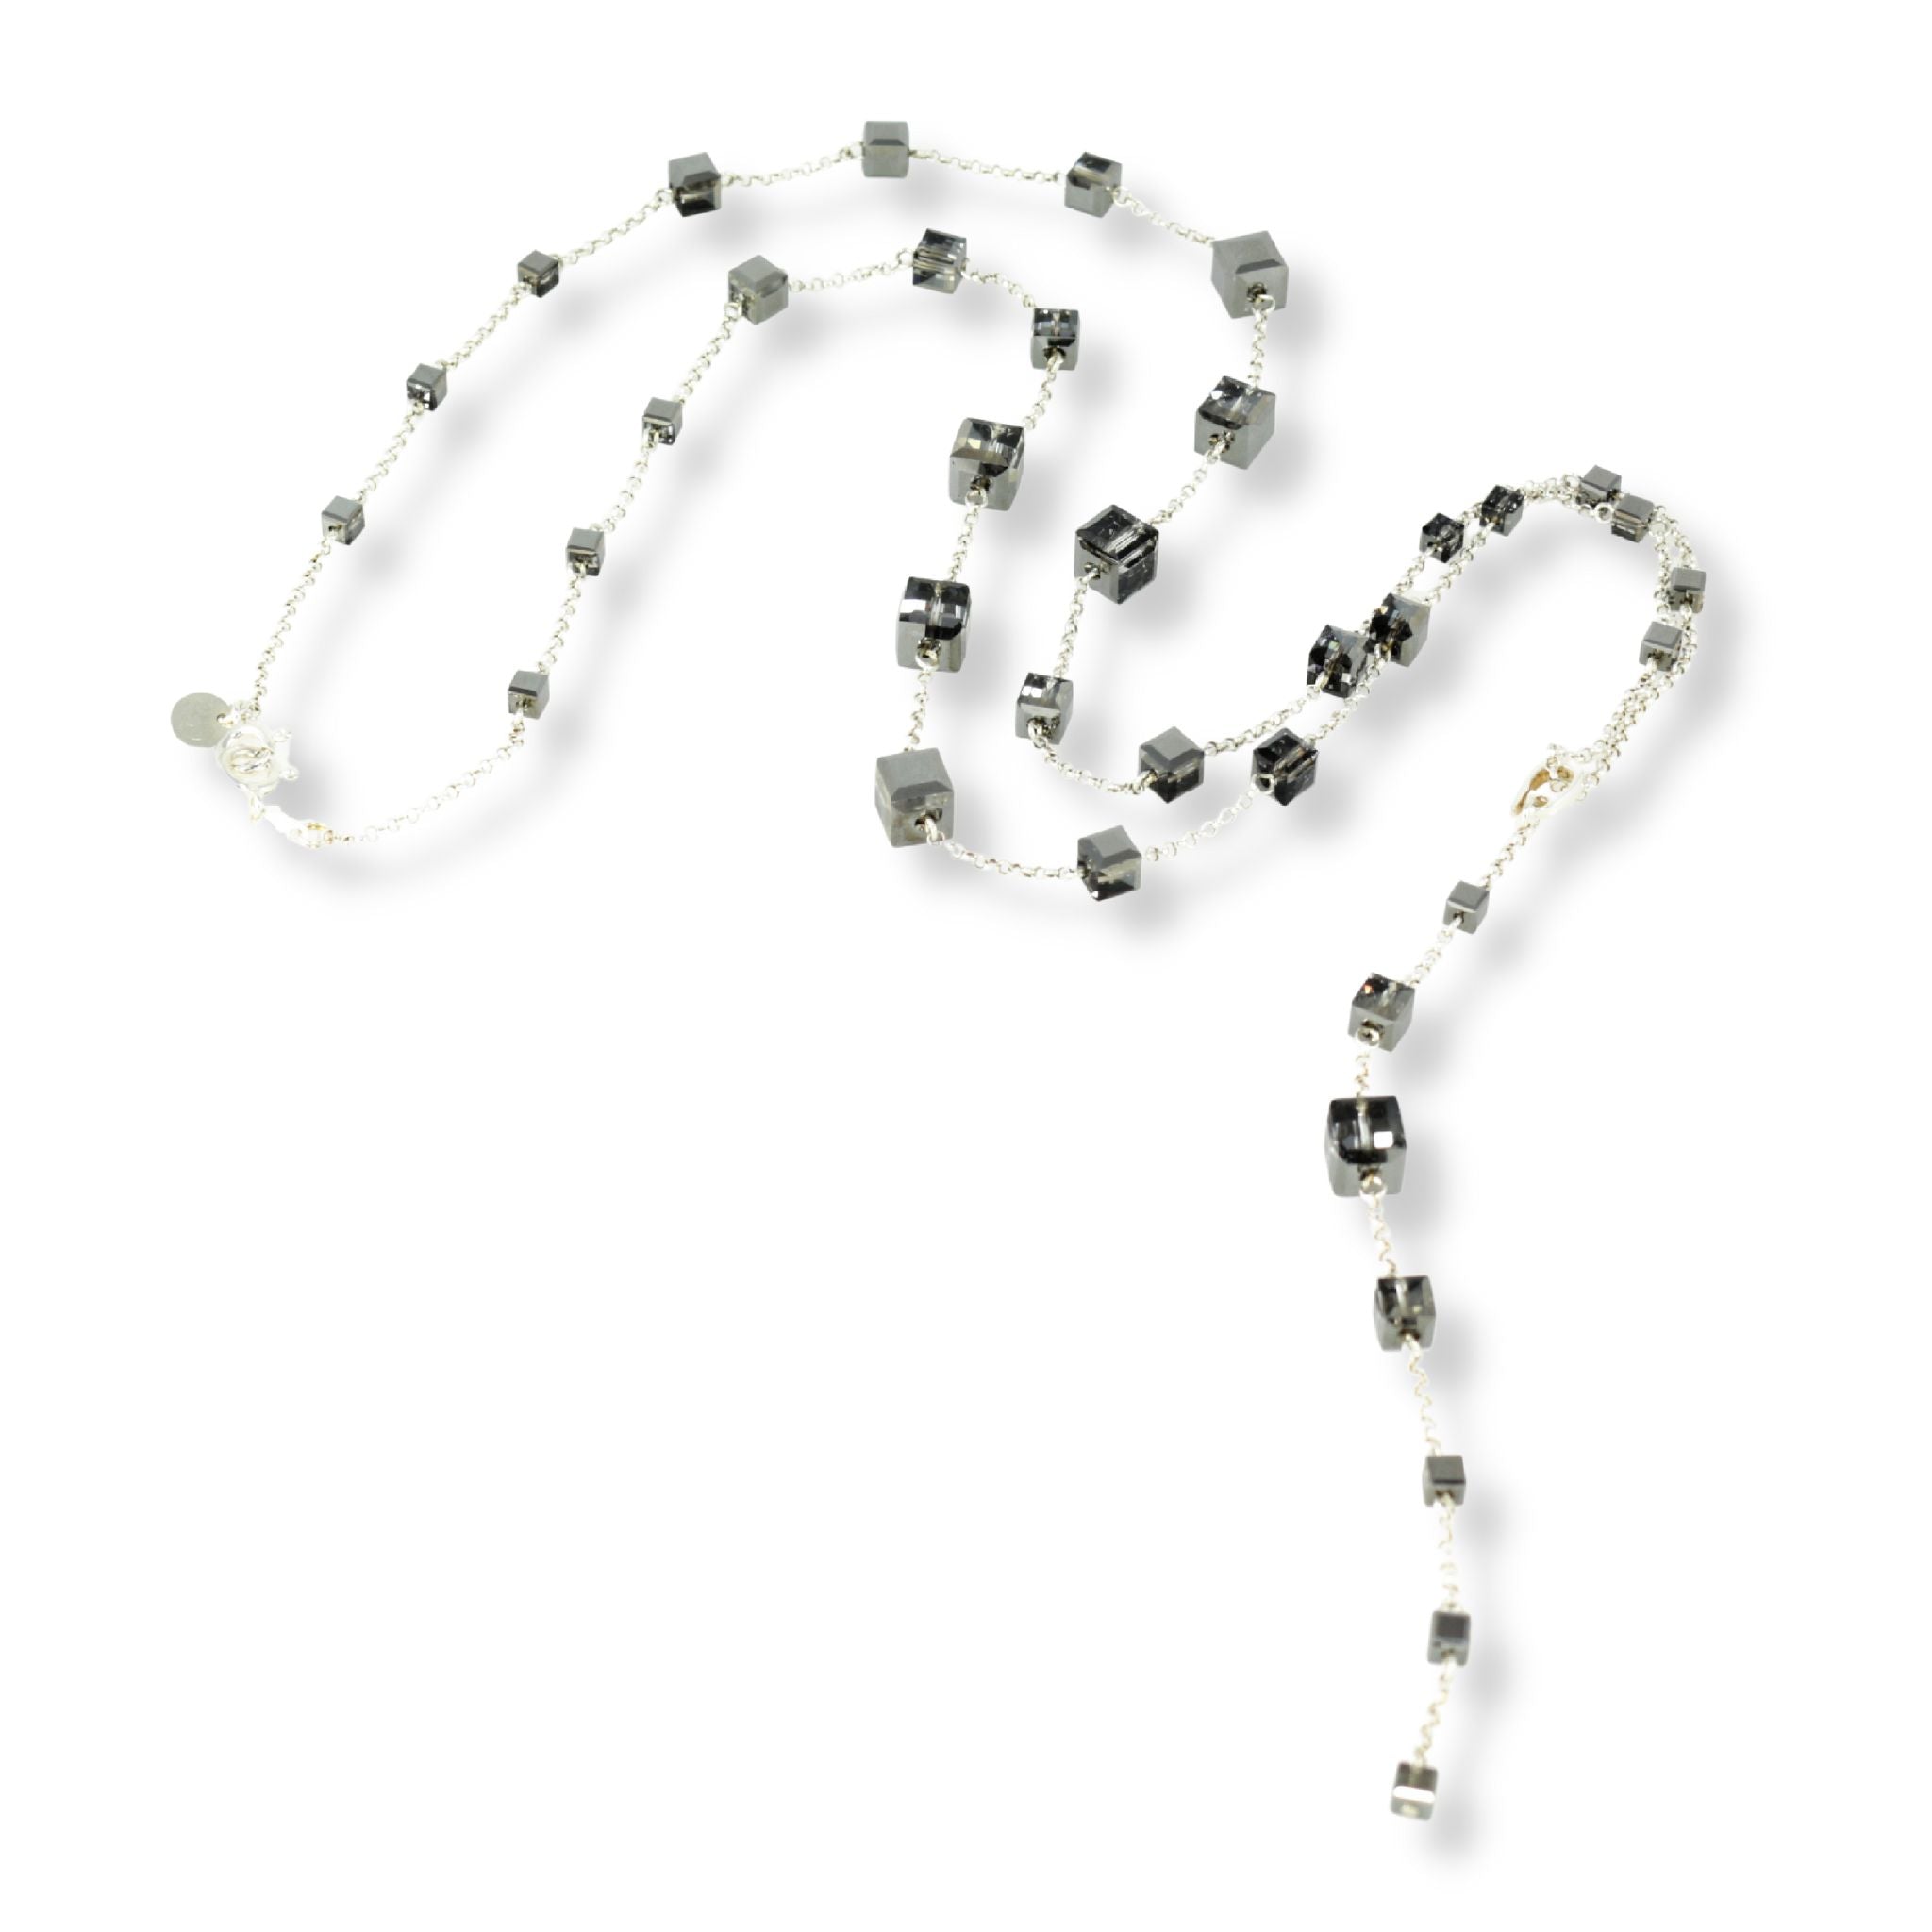 Long, versatile necklace with removable pendant. Consisting of a sterling silver chain and clasps, accompanied by several dark, shiny grey Swarovski cubed crystals 